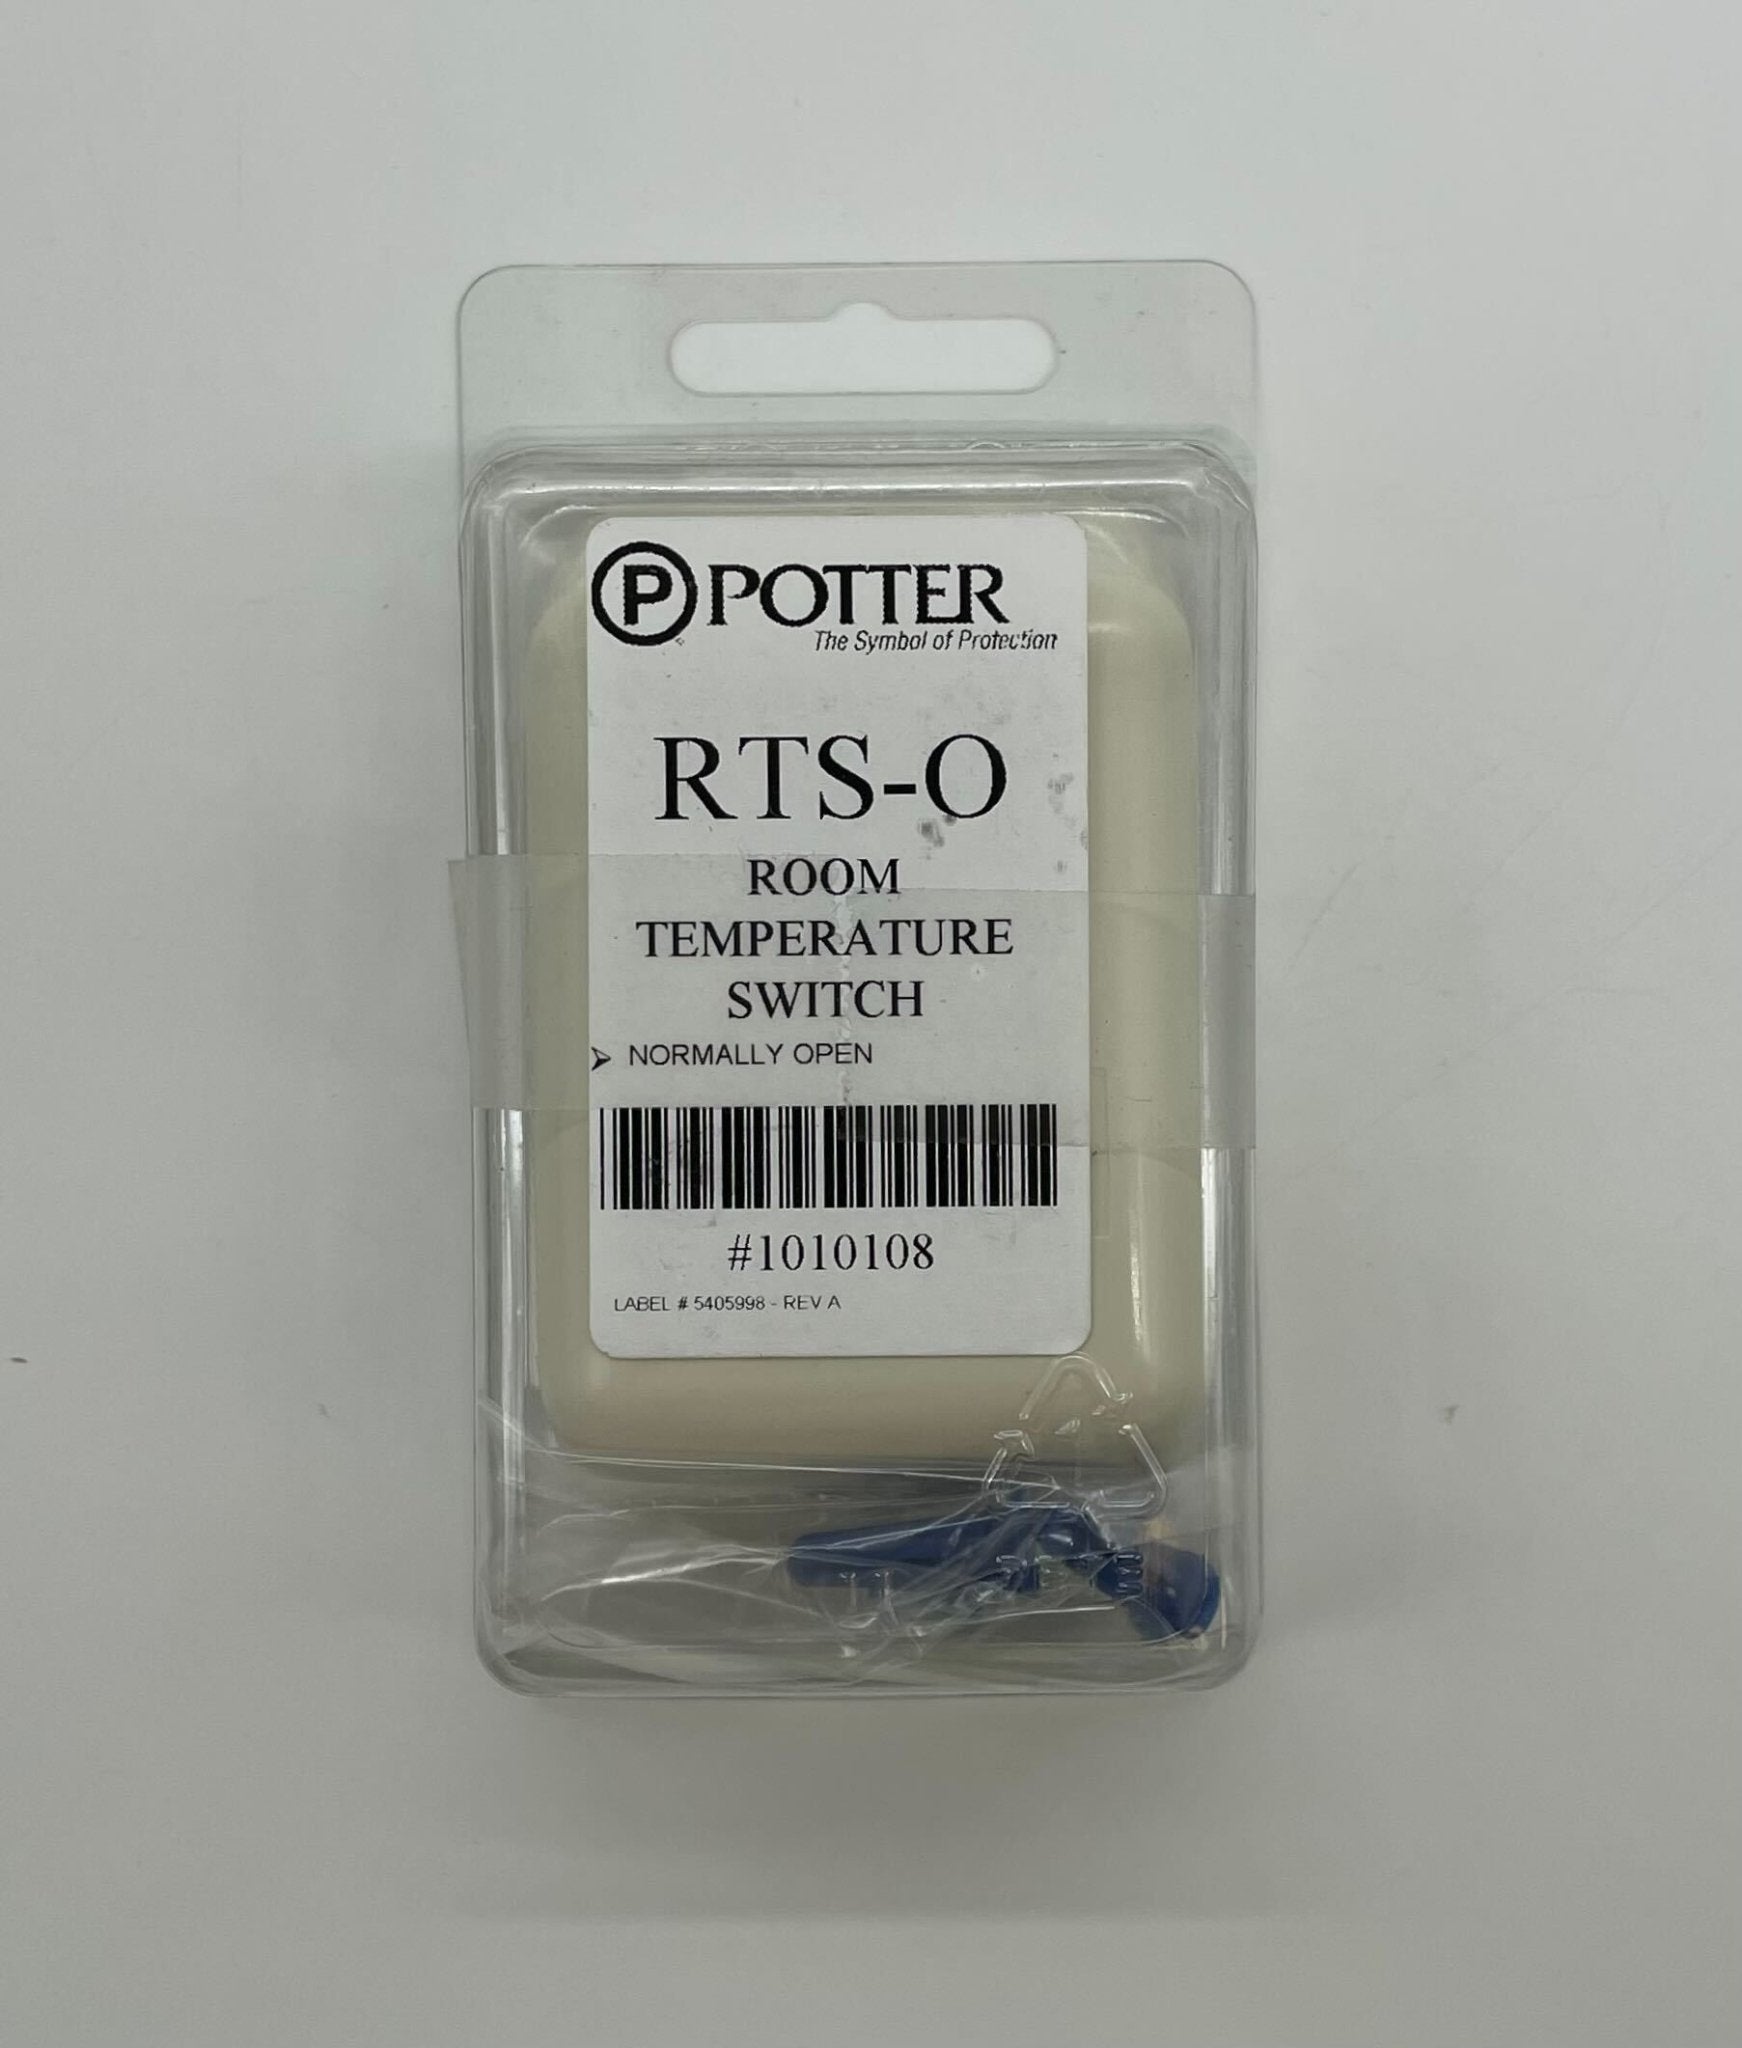 Potter RTS-O - The Fire Alarm Supplier